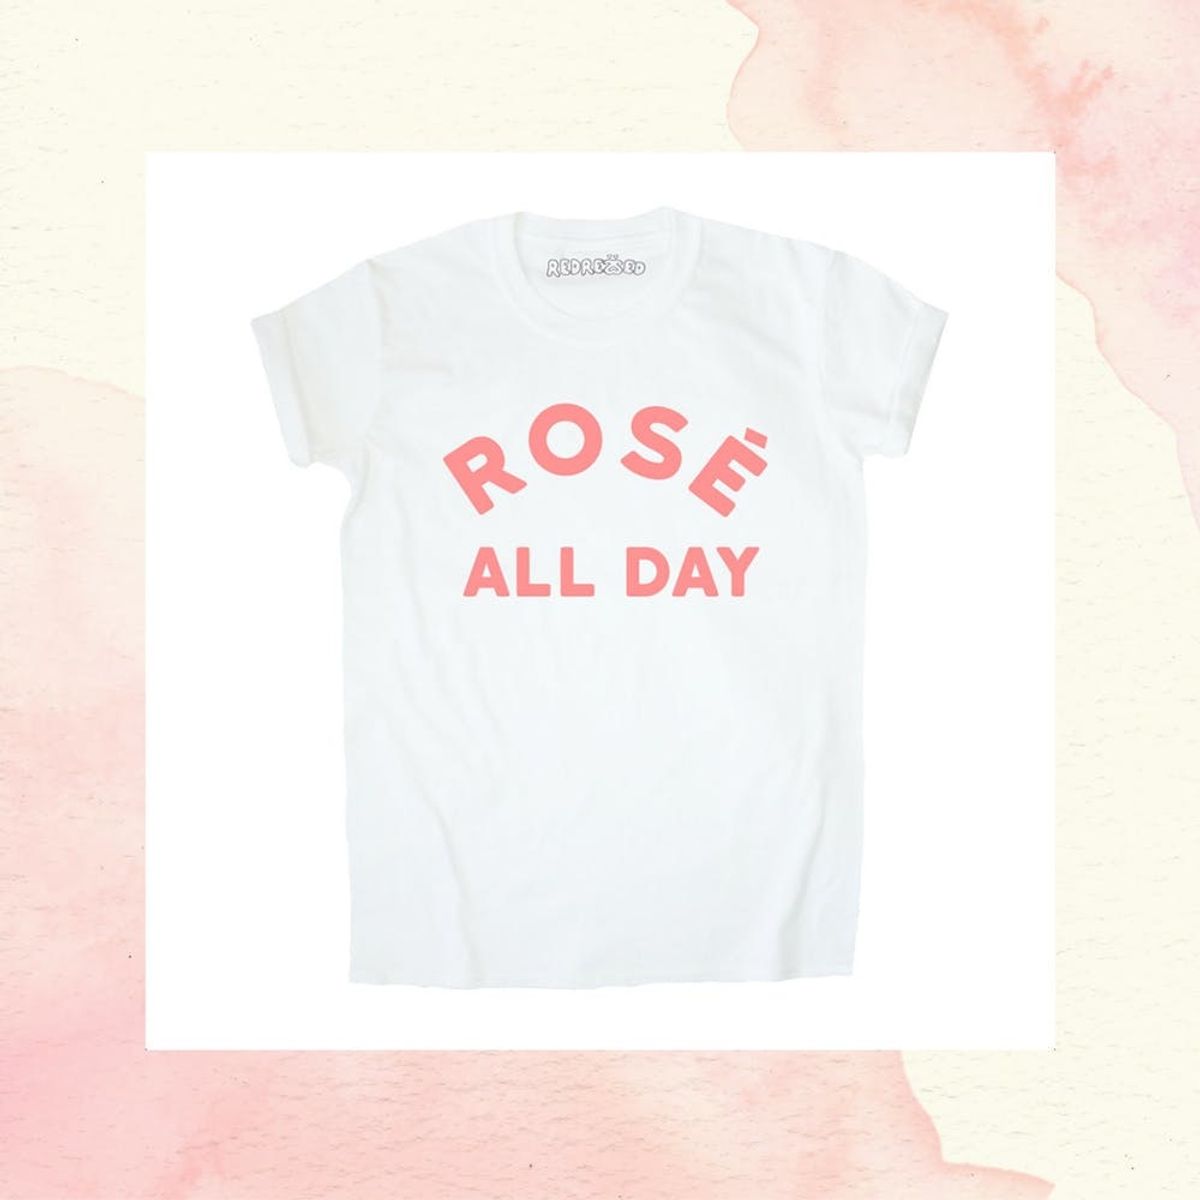 11 Rosé All Day Products to Celebrate National Rosé Day All Year Long